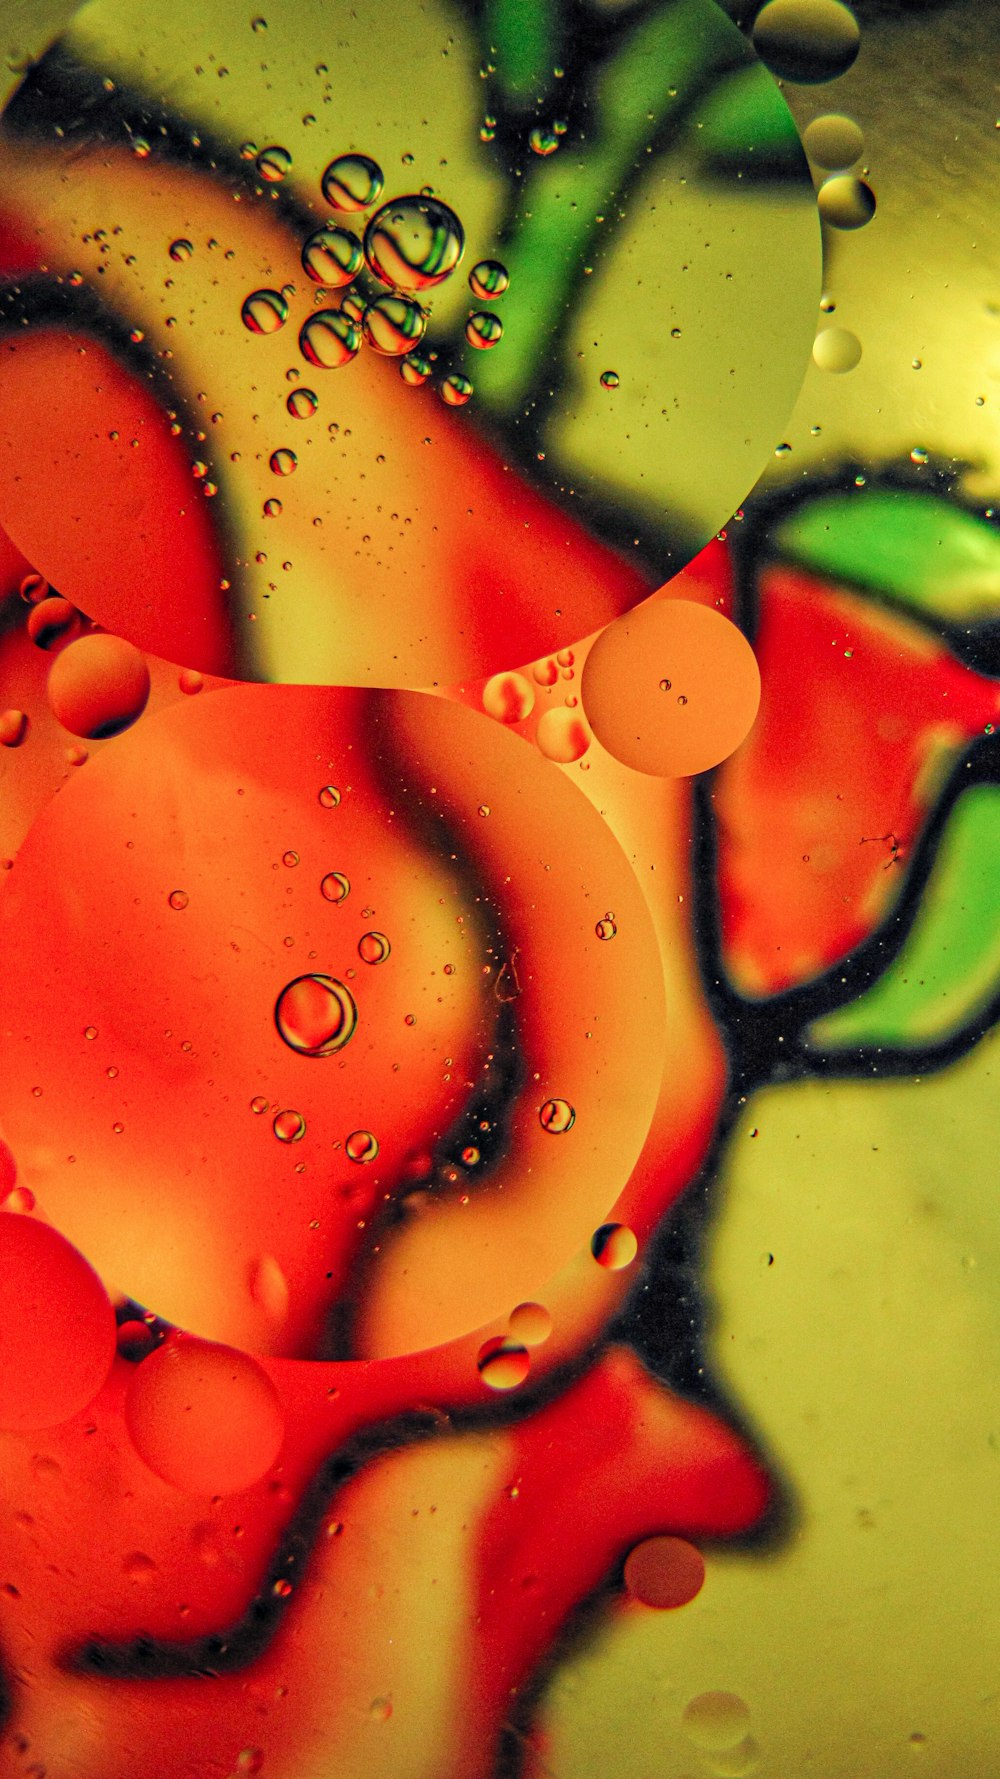 a close up of a red and green object with drops of water on it